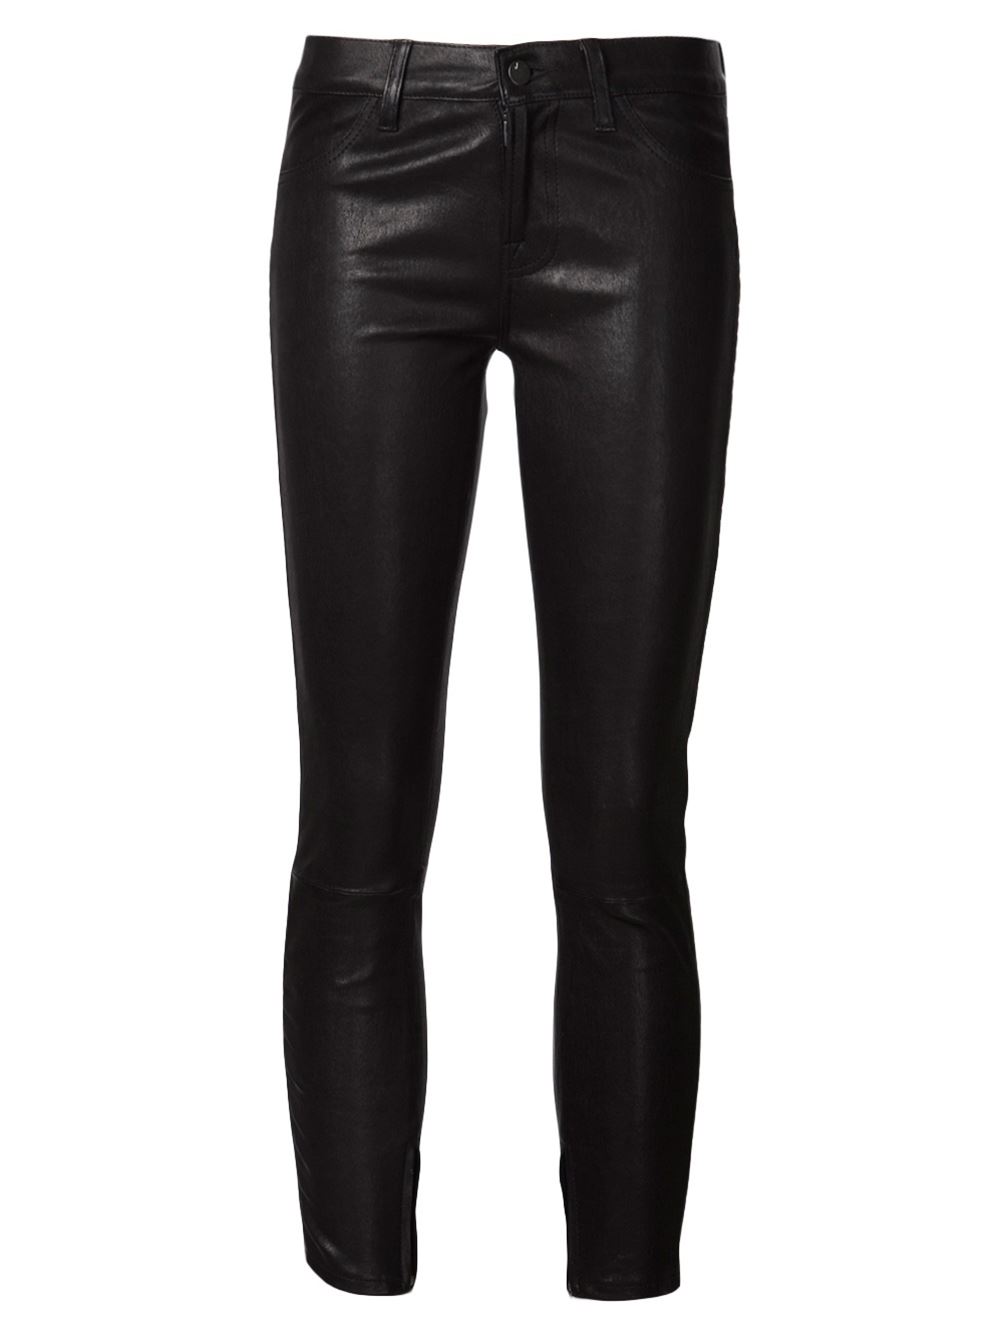 Black leather cropped trousers from J Brand